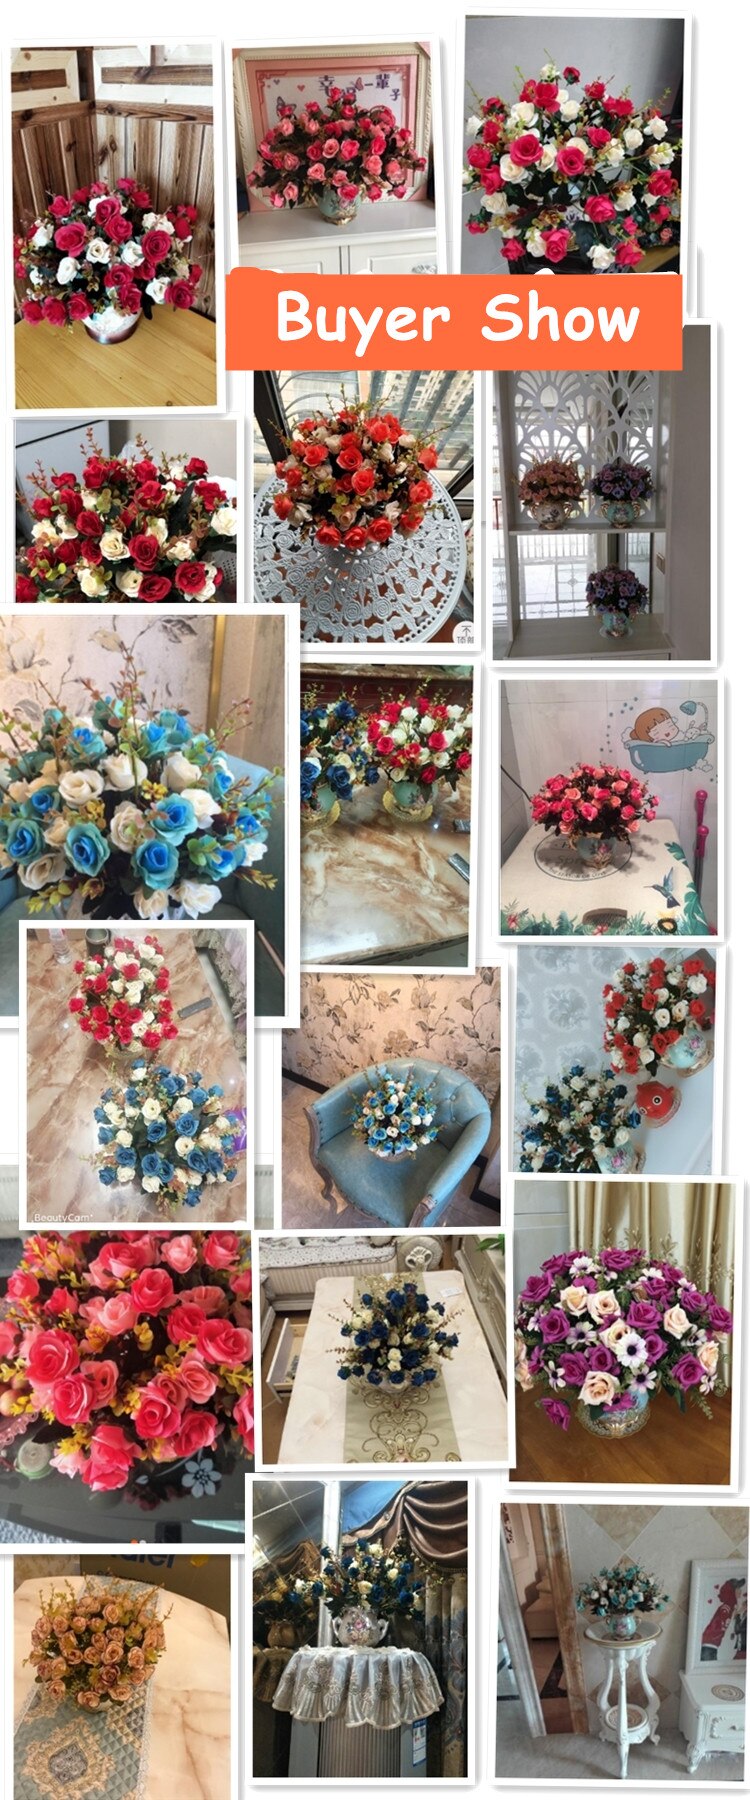 Quality and craftsmanship of silk flower production